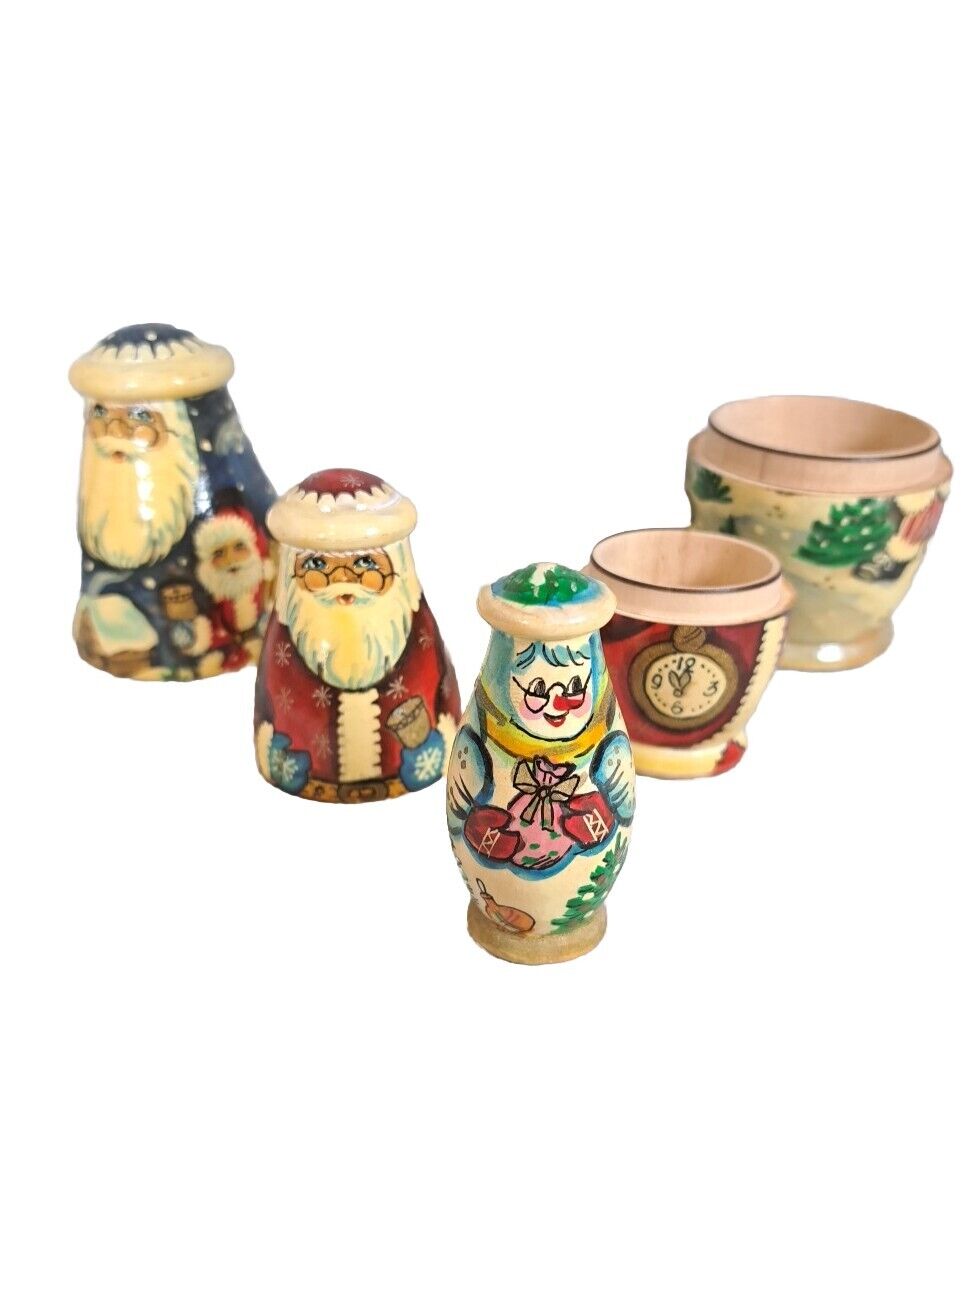 Santa Claus Nesting Stacking Dolls Set of 3 Wood Christmas Toy Russian Style